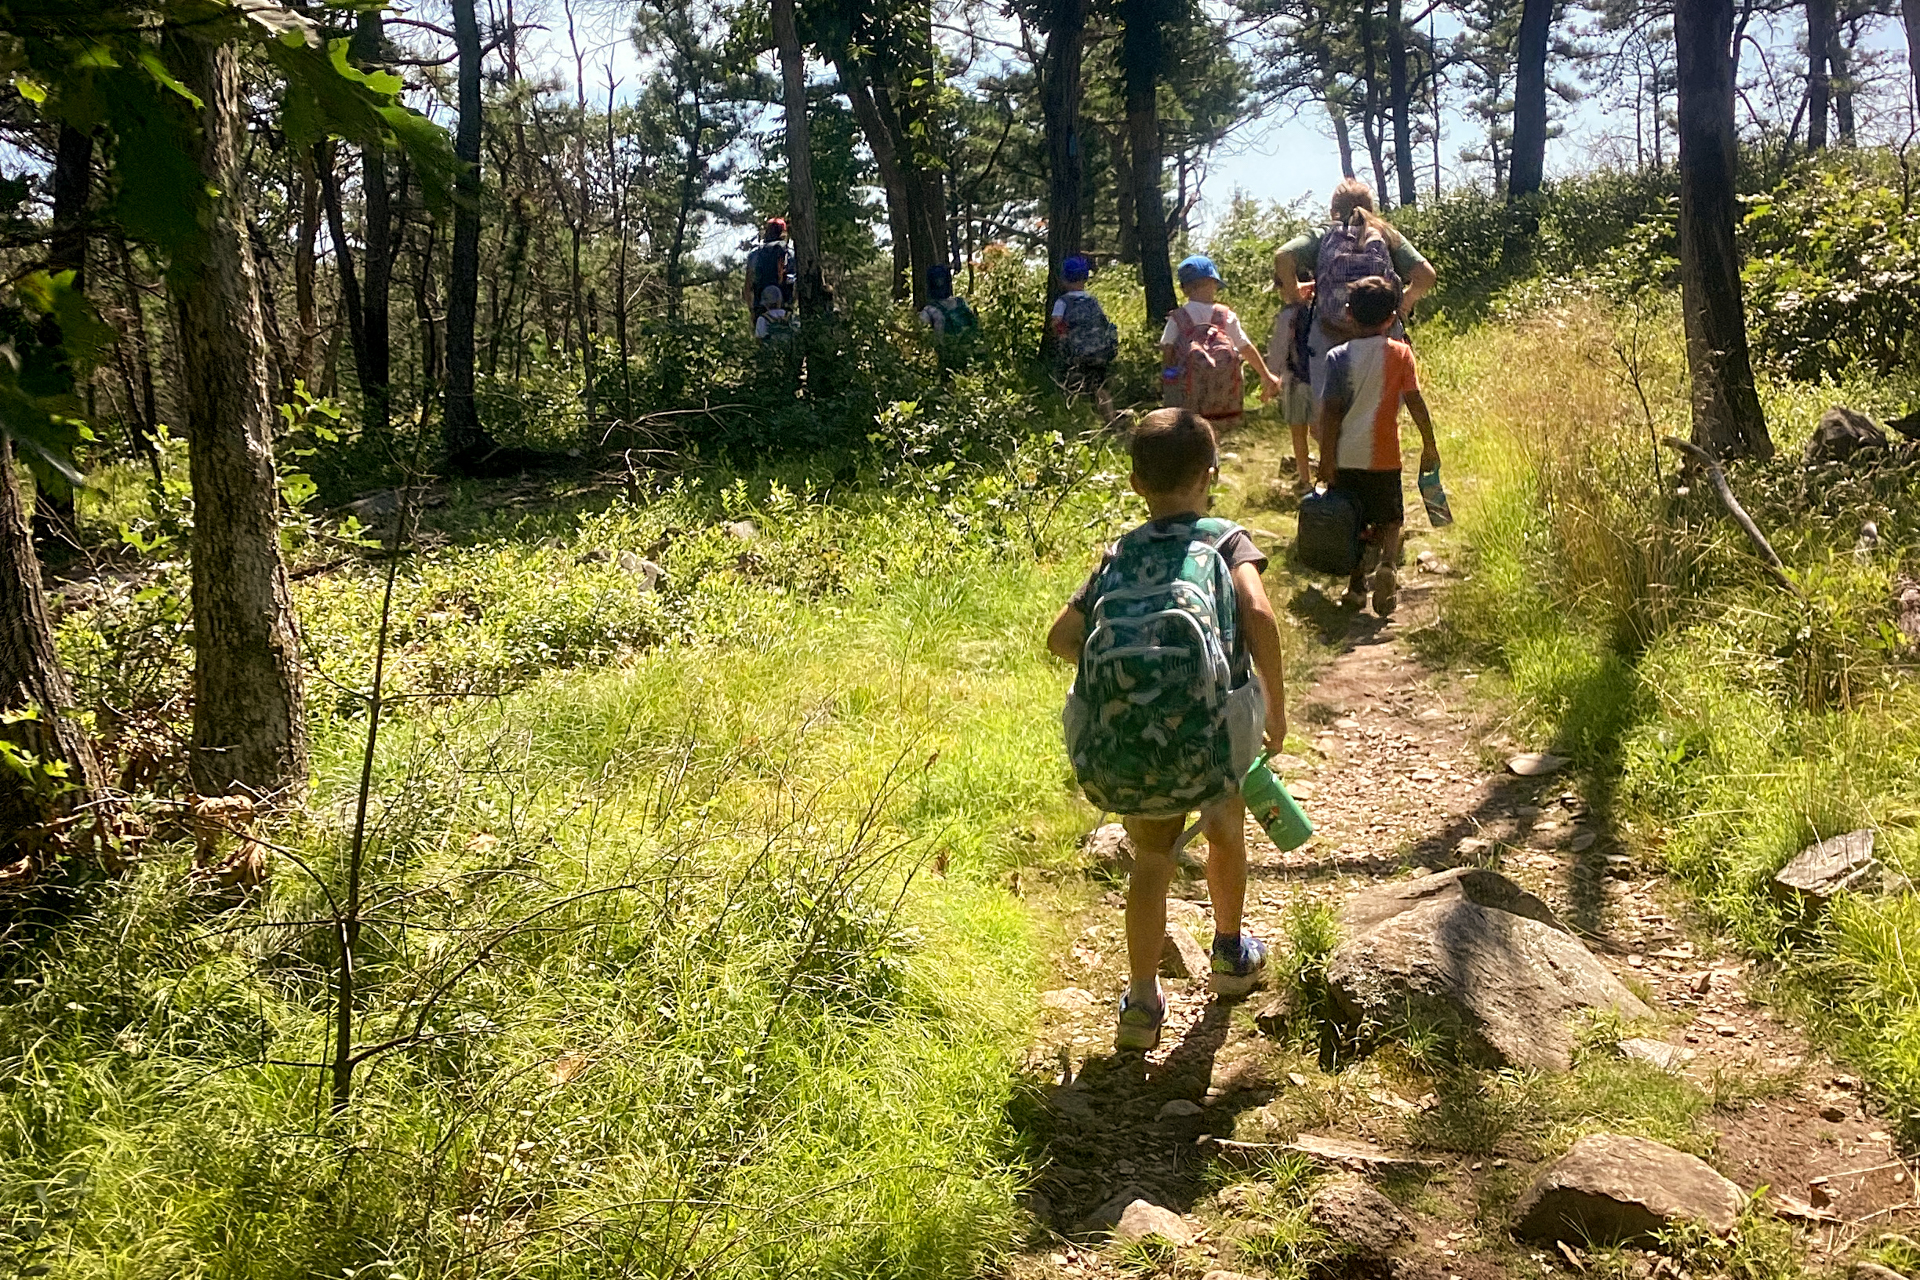 A group of Blue Hills campers wearing backpacks and carrying water bottles, enjoying a hike on a forest trail in the Blue Hills Reservation